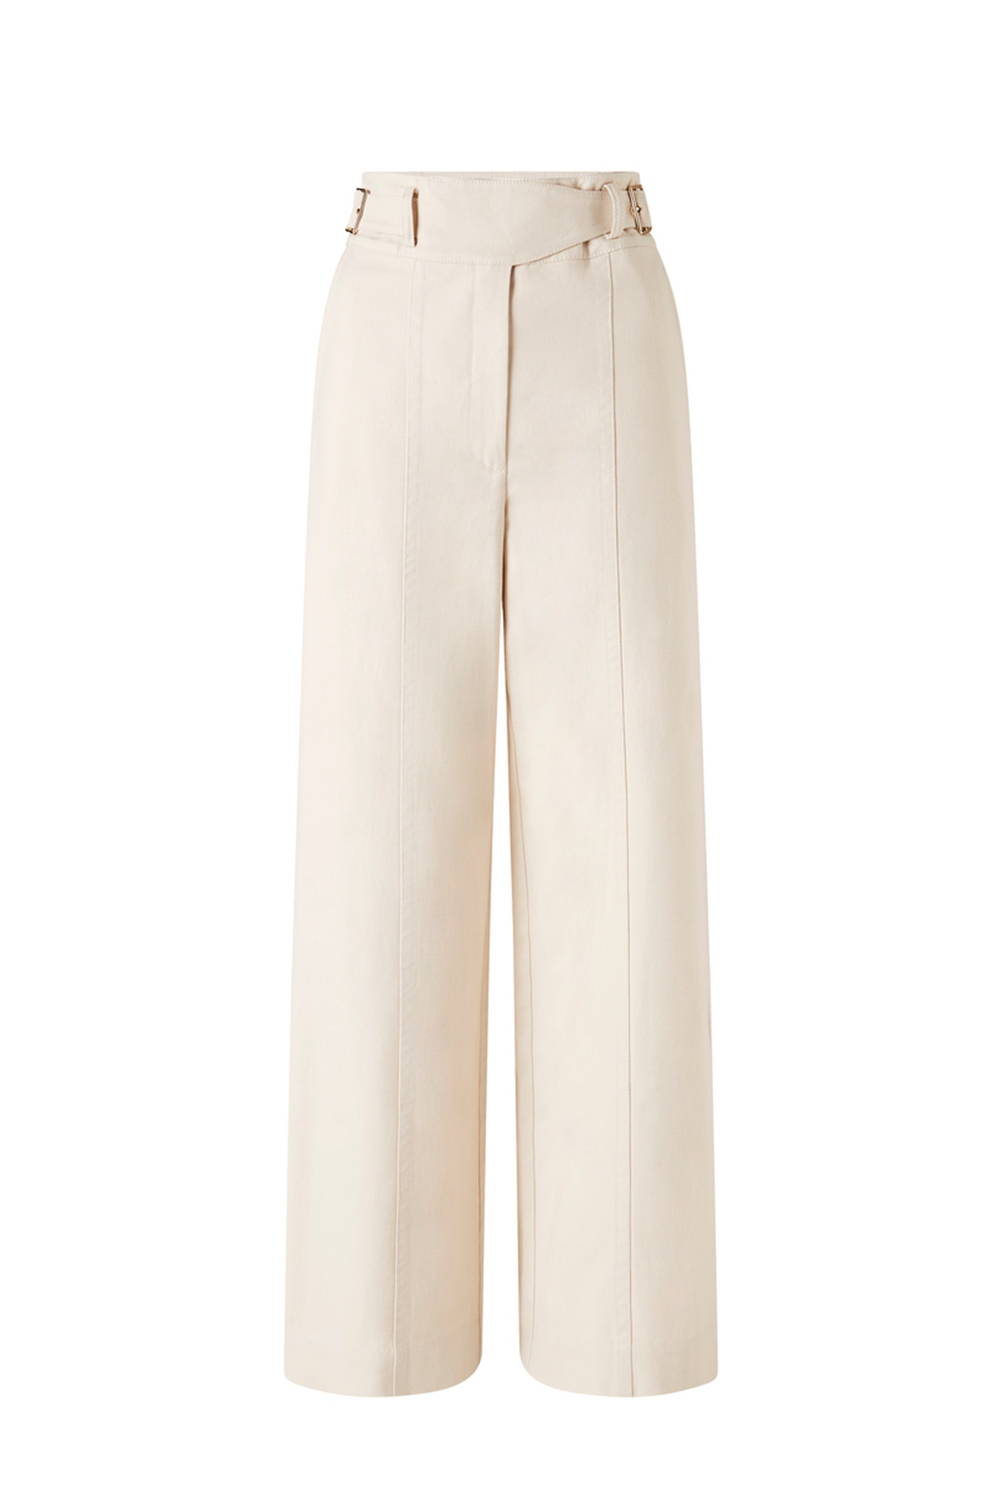 Oroton Wide Leg Pant with Buckle in Cream